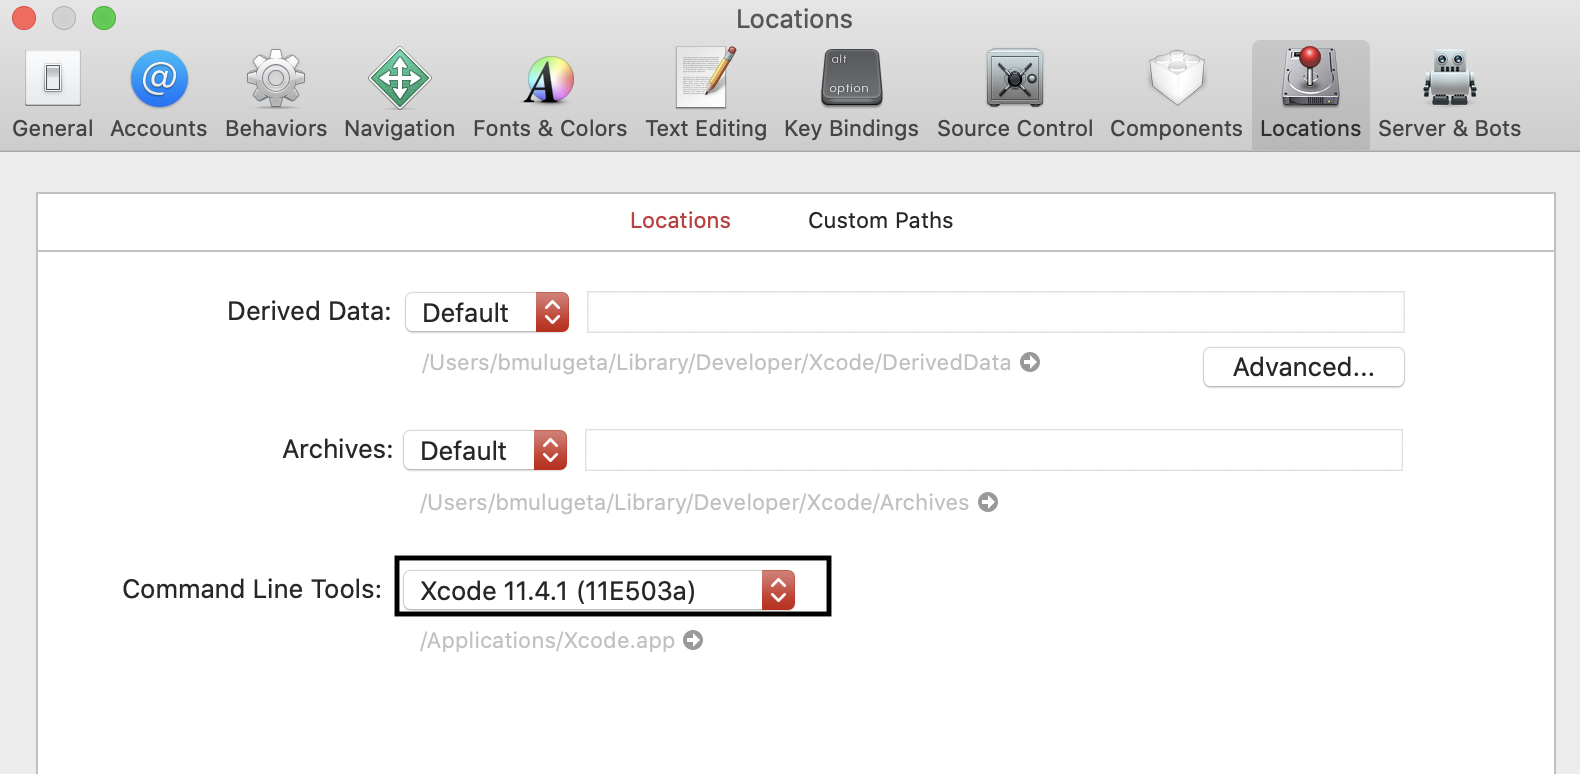 This image shows the expected location to add XCode.